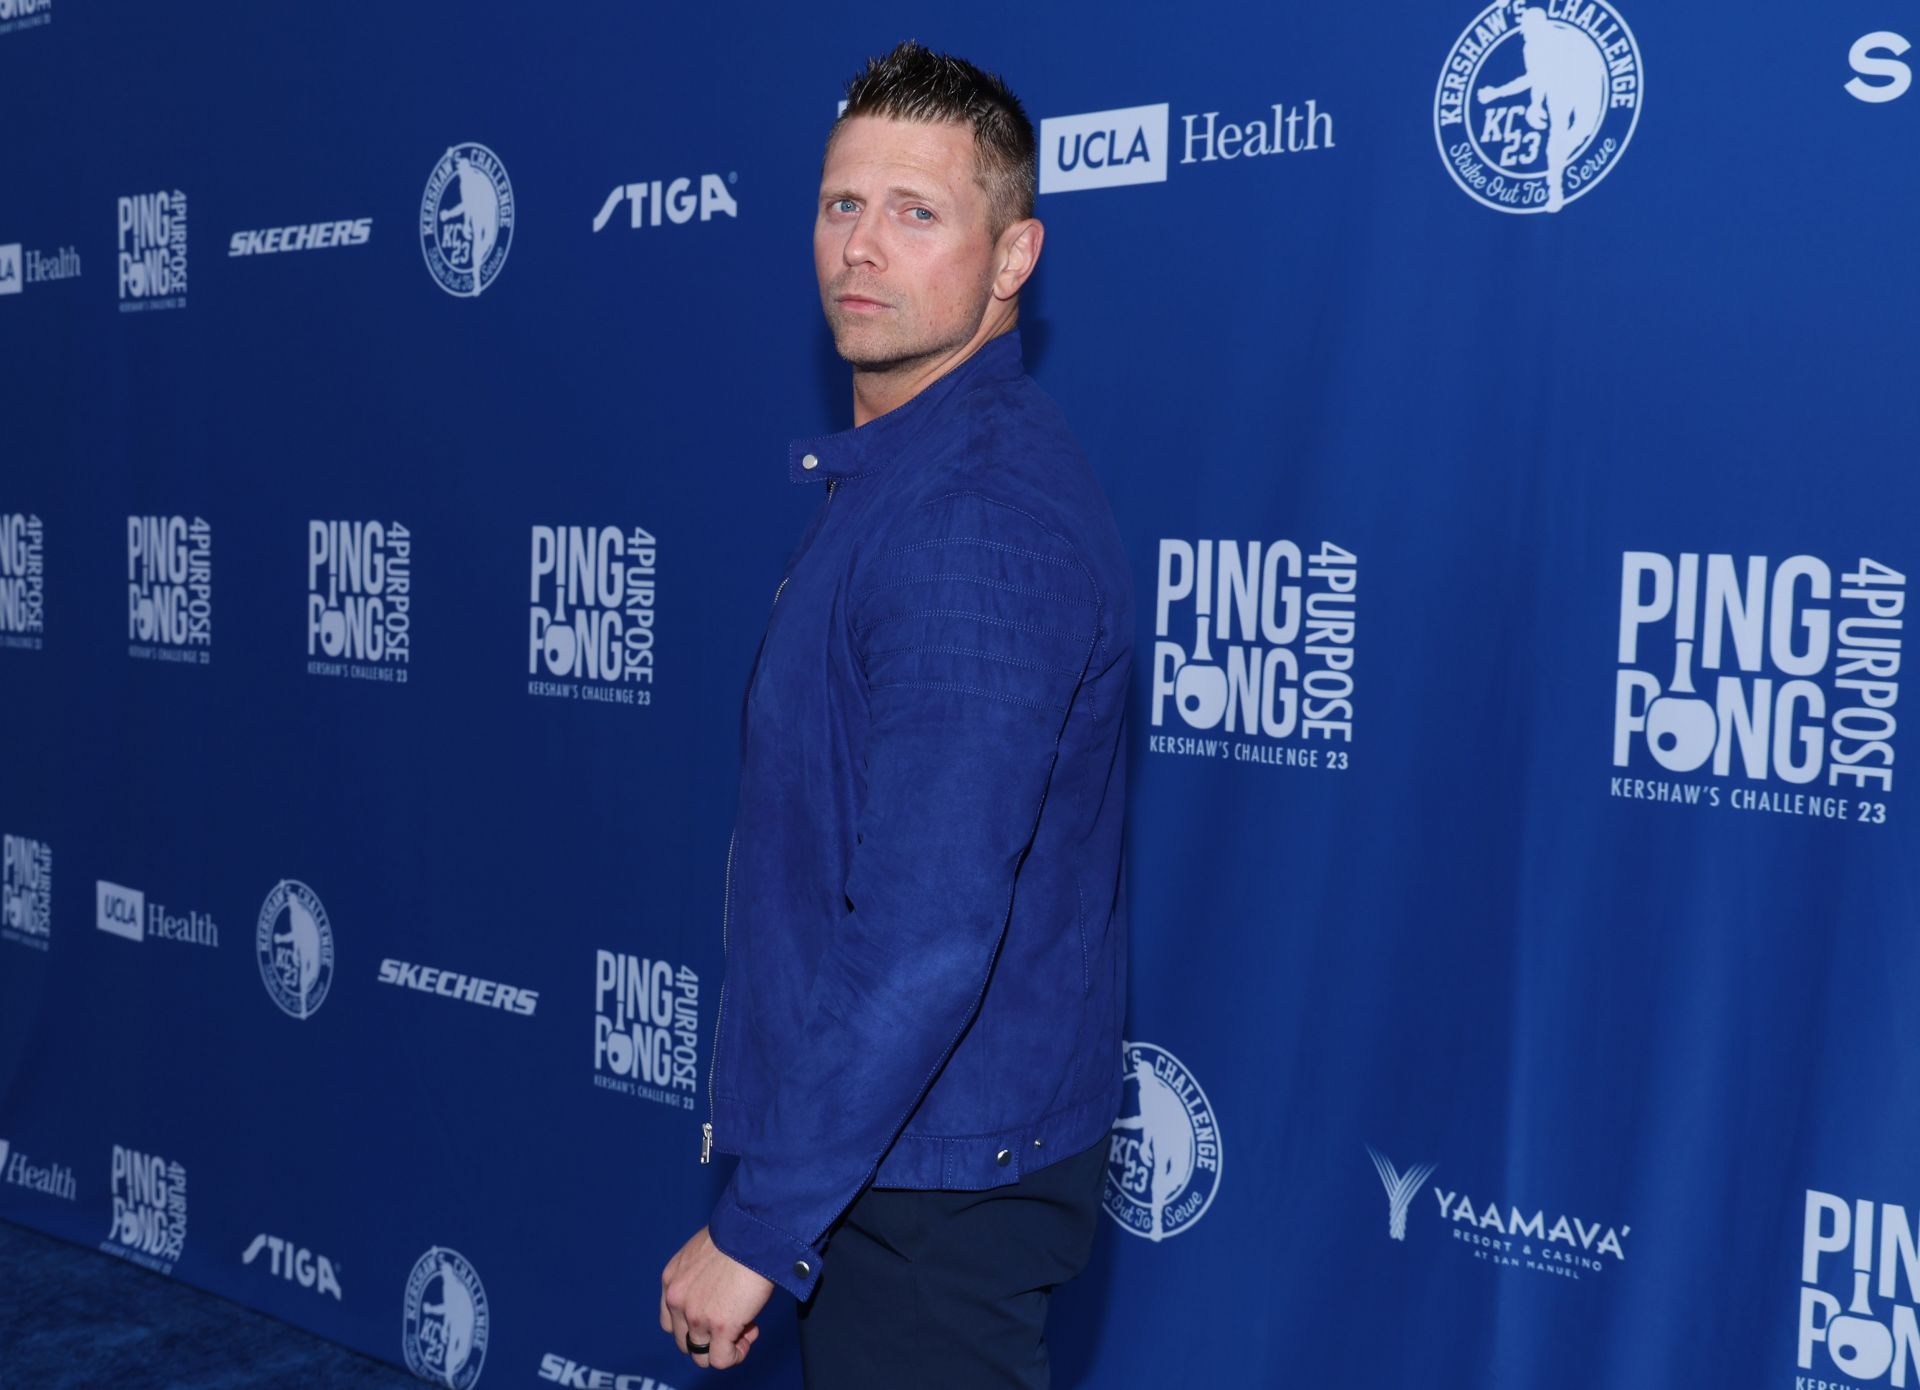 Ping Pong 4 Purpose 2023 at Dodger Stadium presented by Skechers and UCLA Health (Credit: Getty)